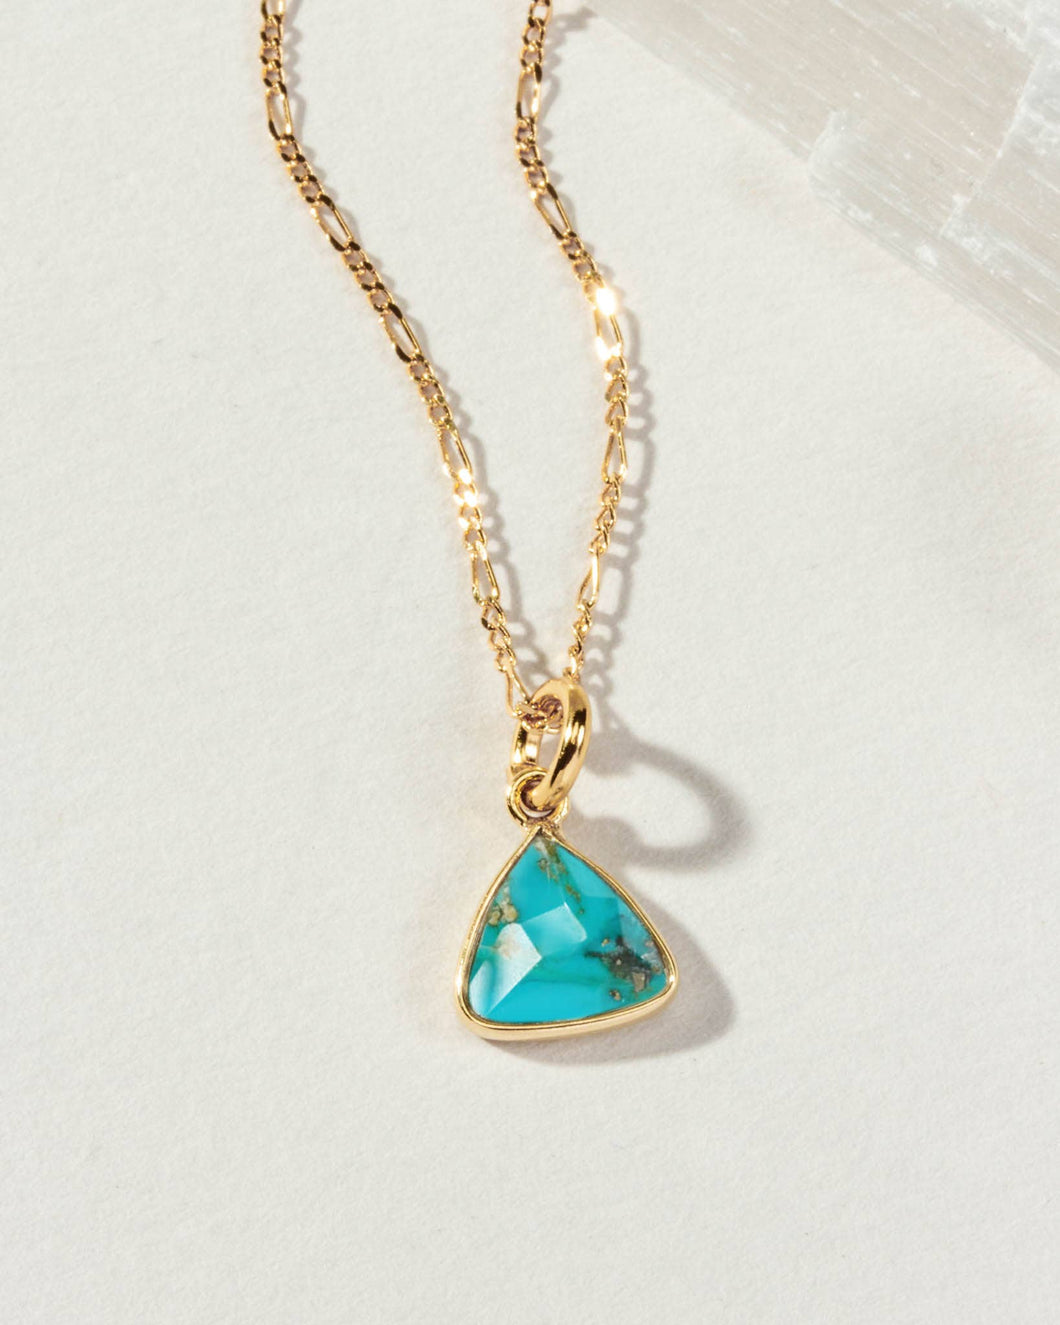 Turquoise Bermuda Triangle Dainty Collar Necklace